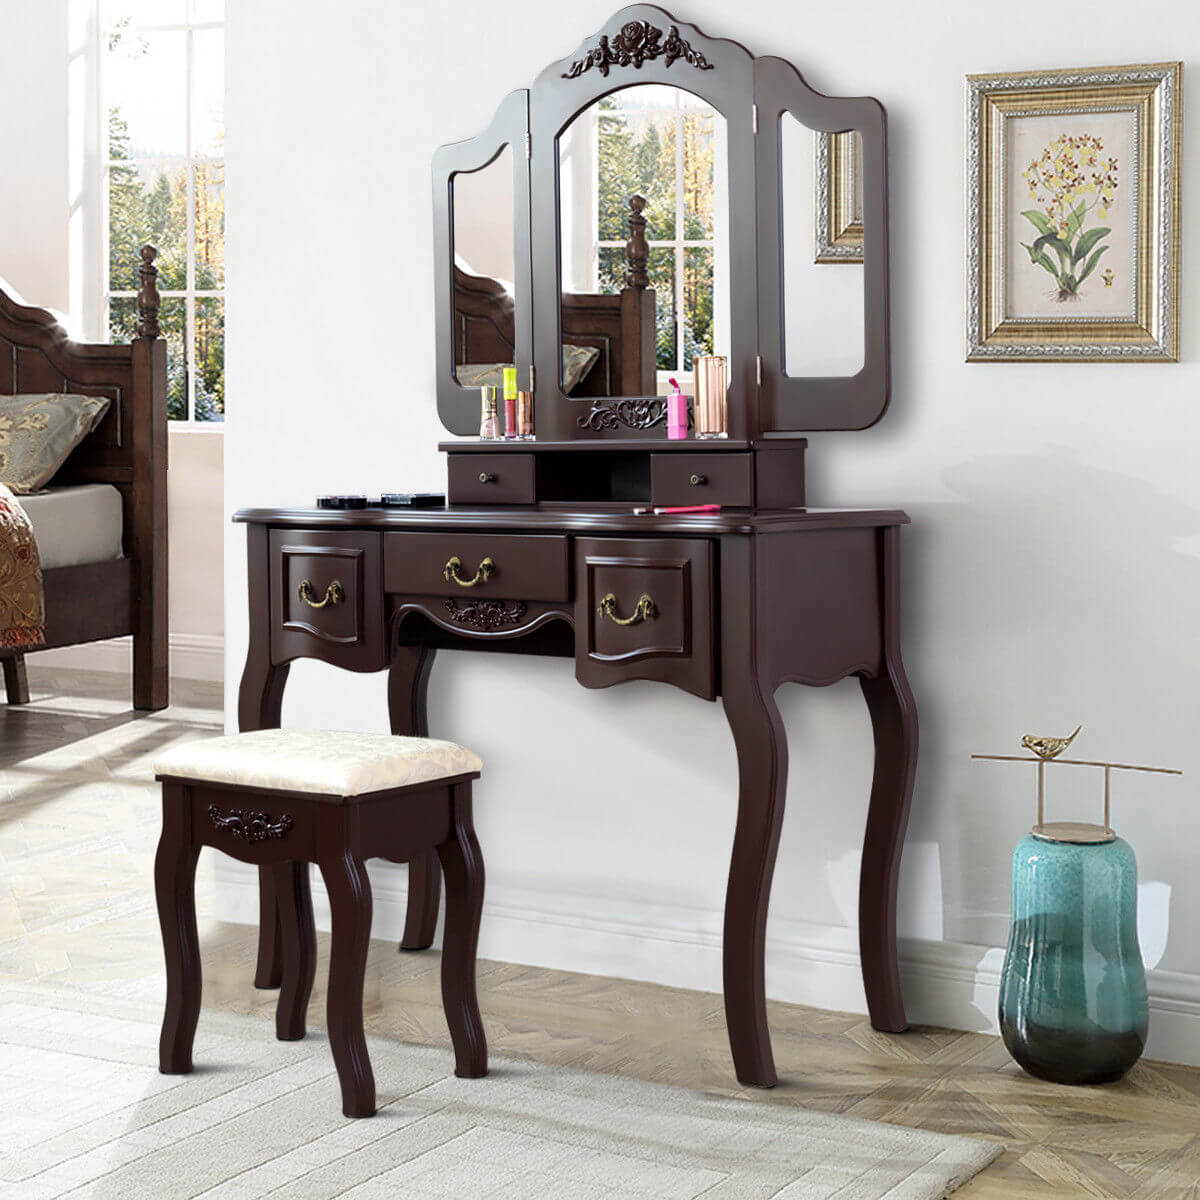 How To Choose An Antique Dressing Table